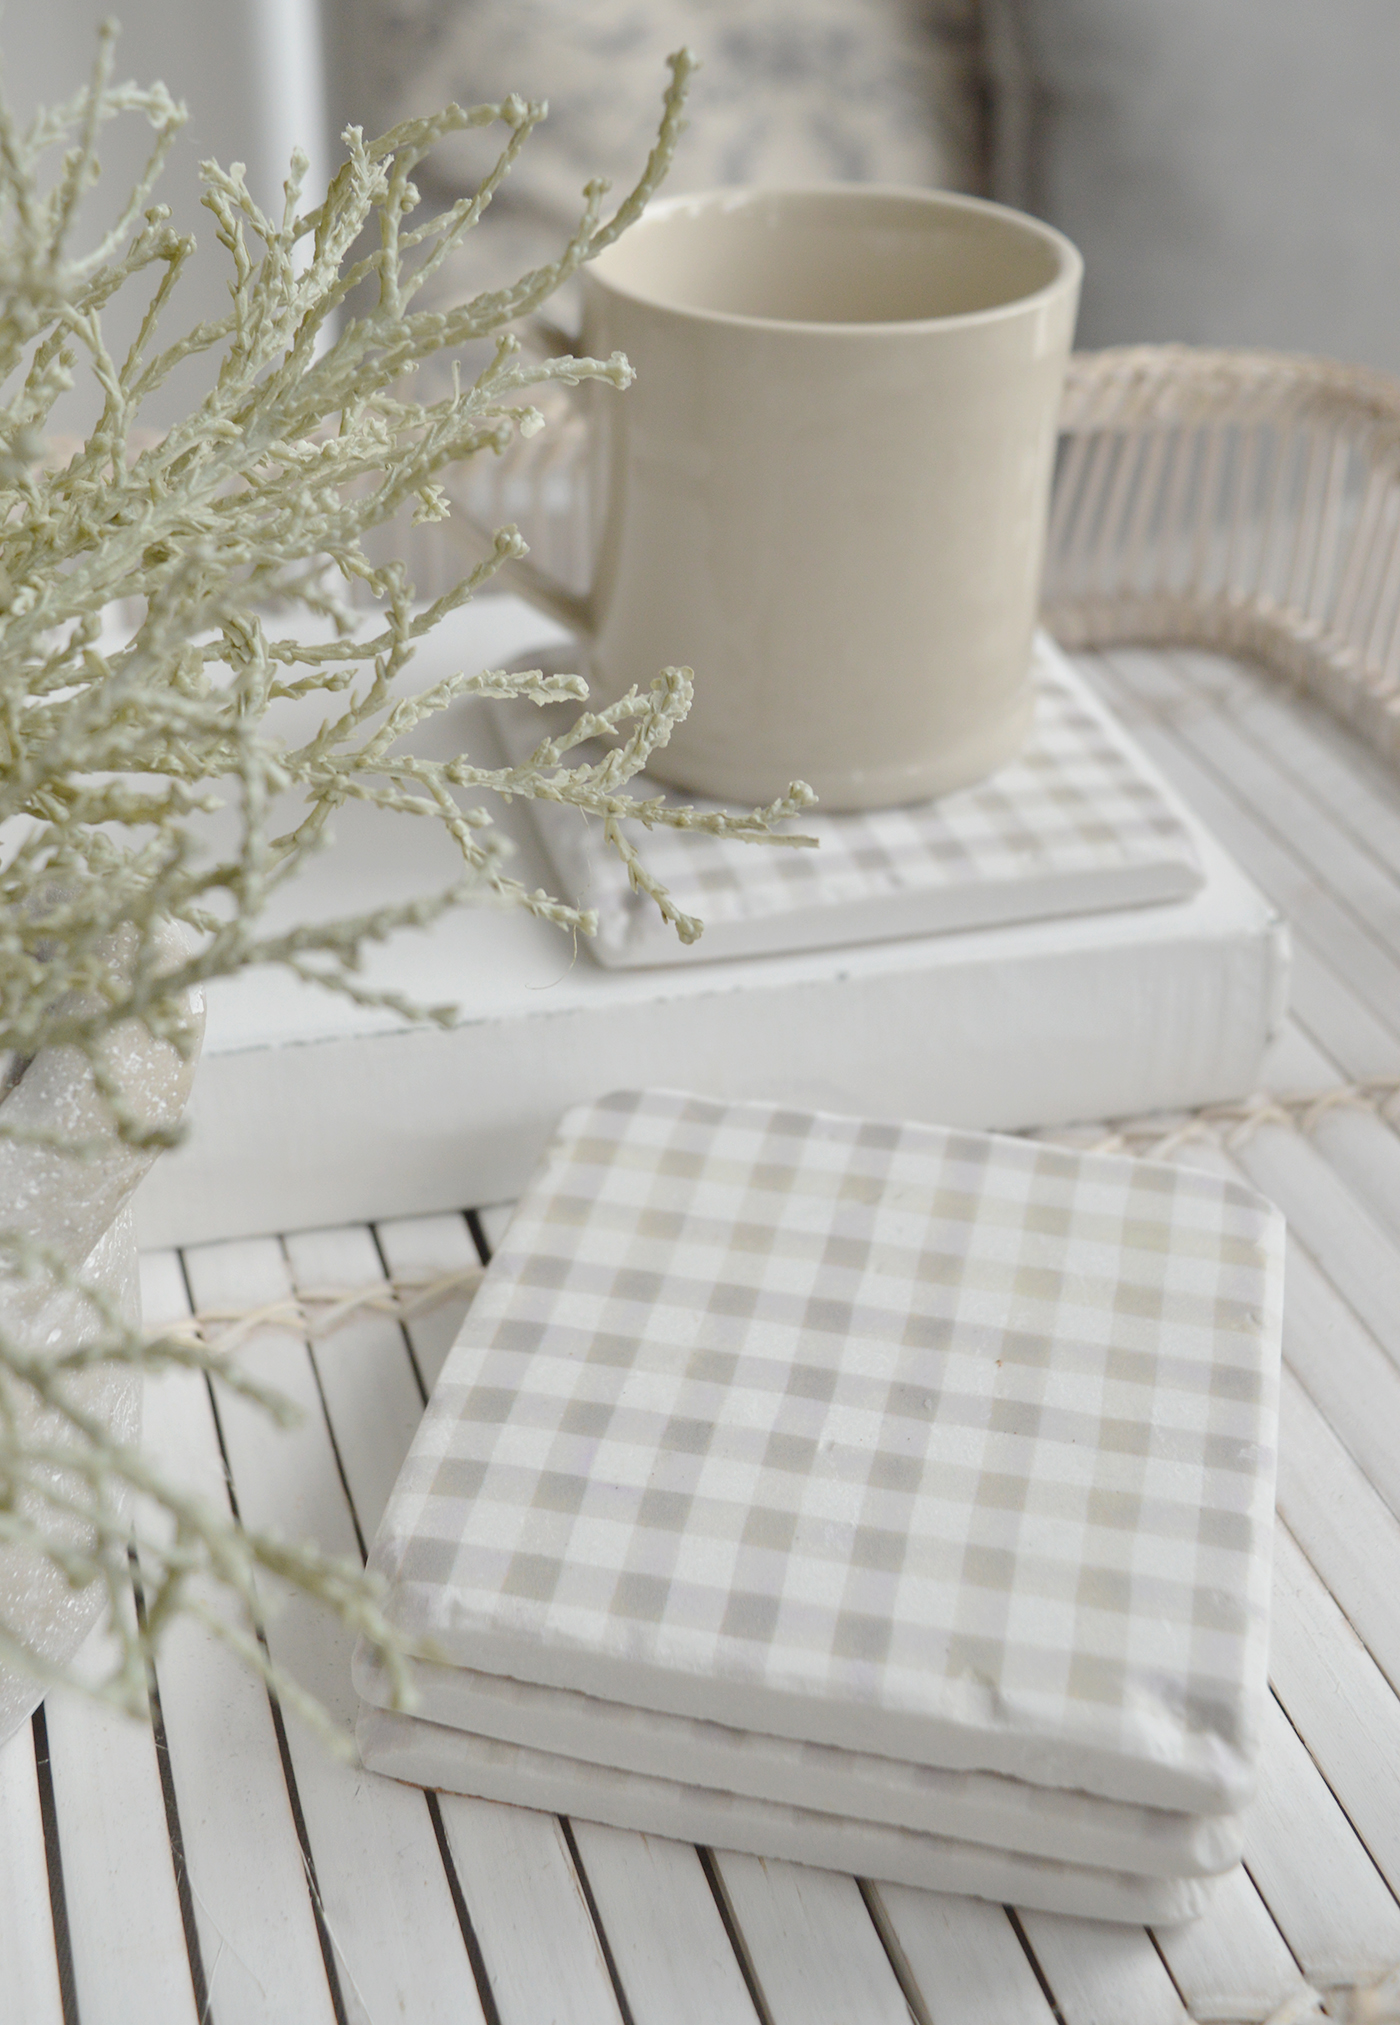 Natural Gingham coasters - New England modern farmhouse, country and coastal furniture, home decor and interiors